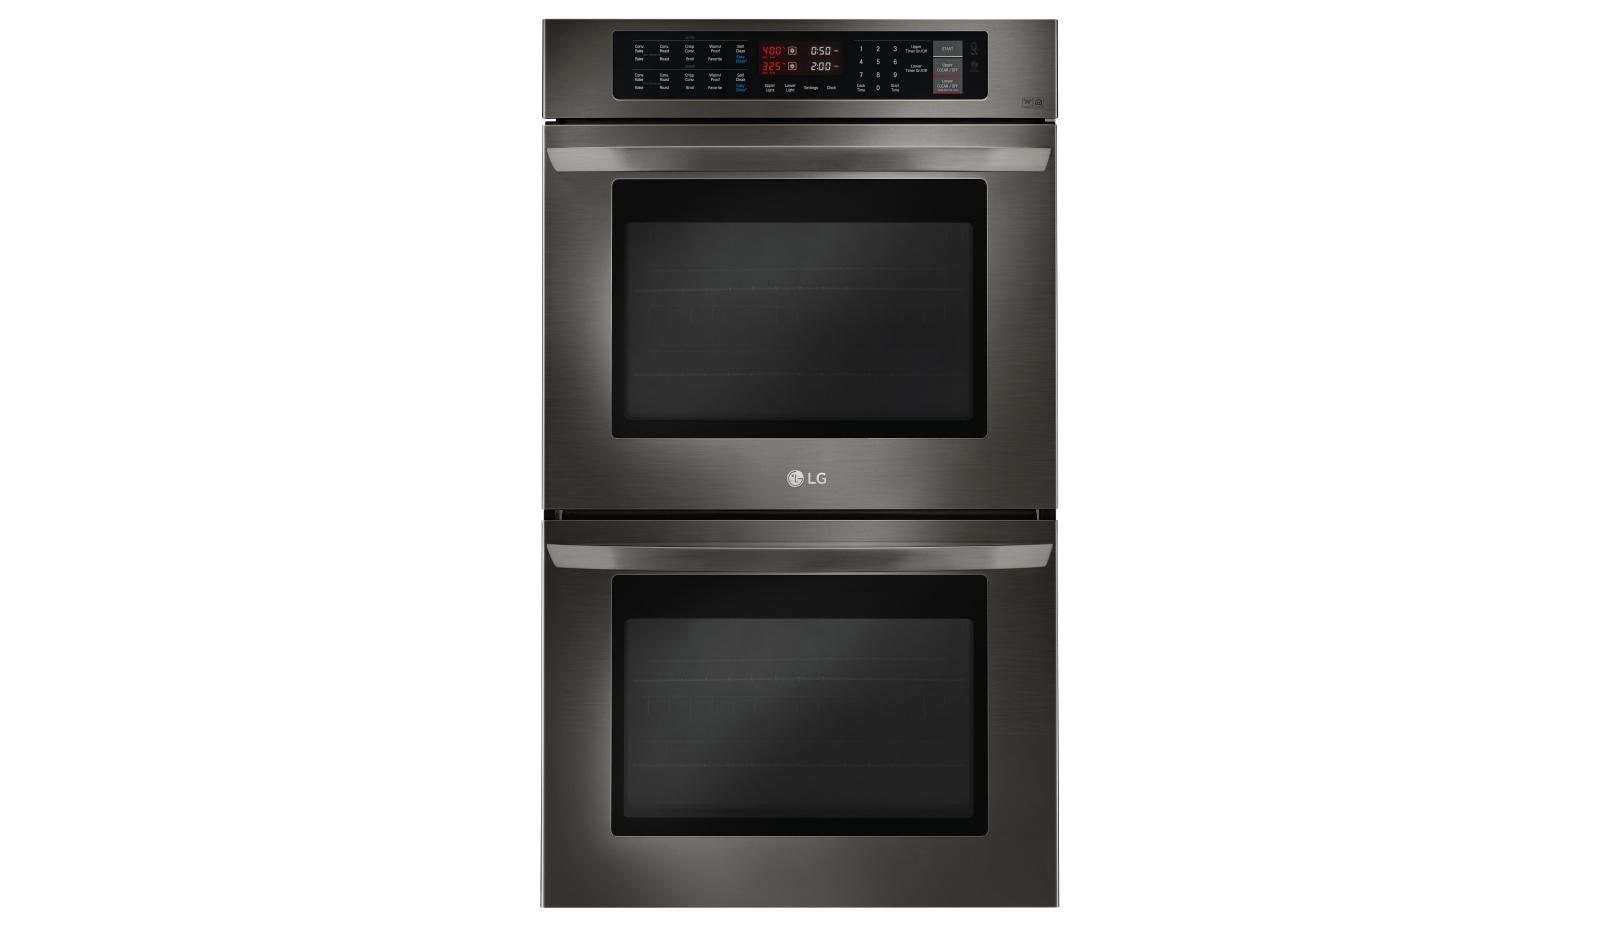 9.4 cu. ft. Double Wall Oven